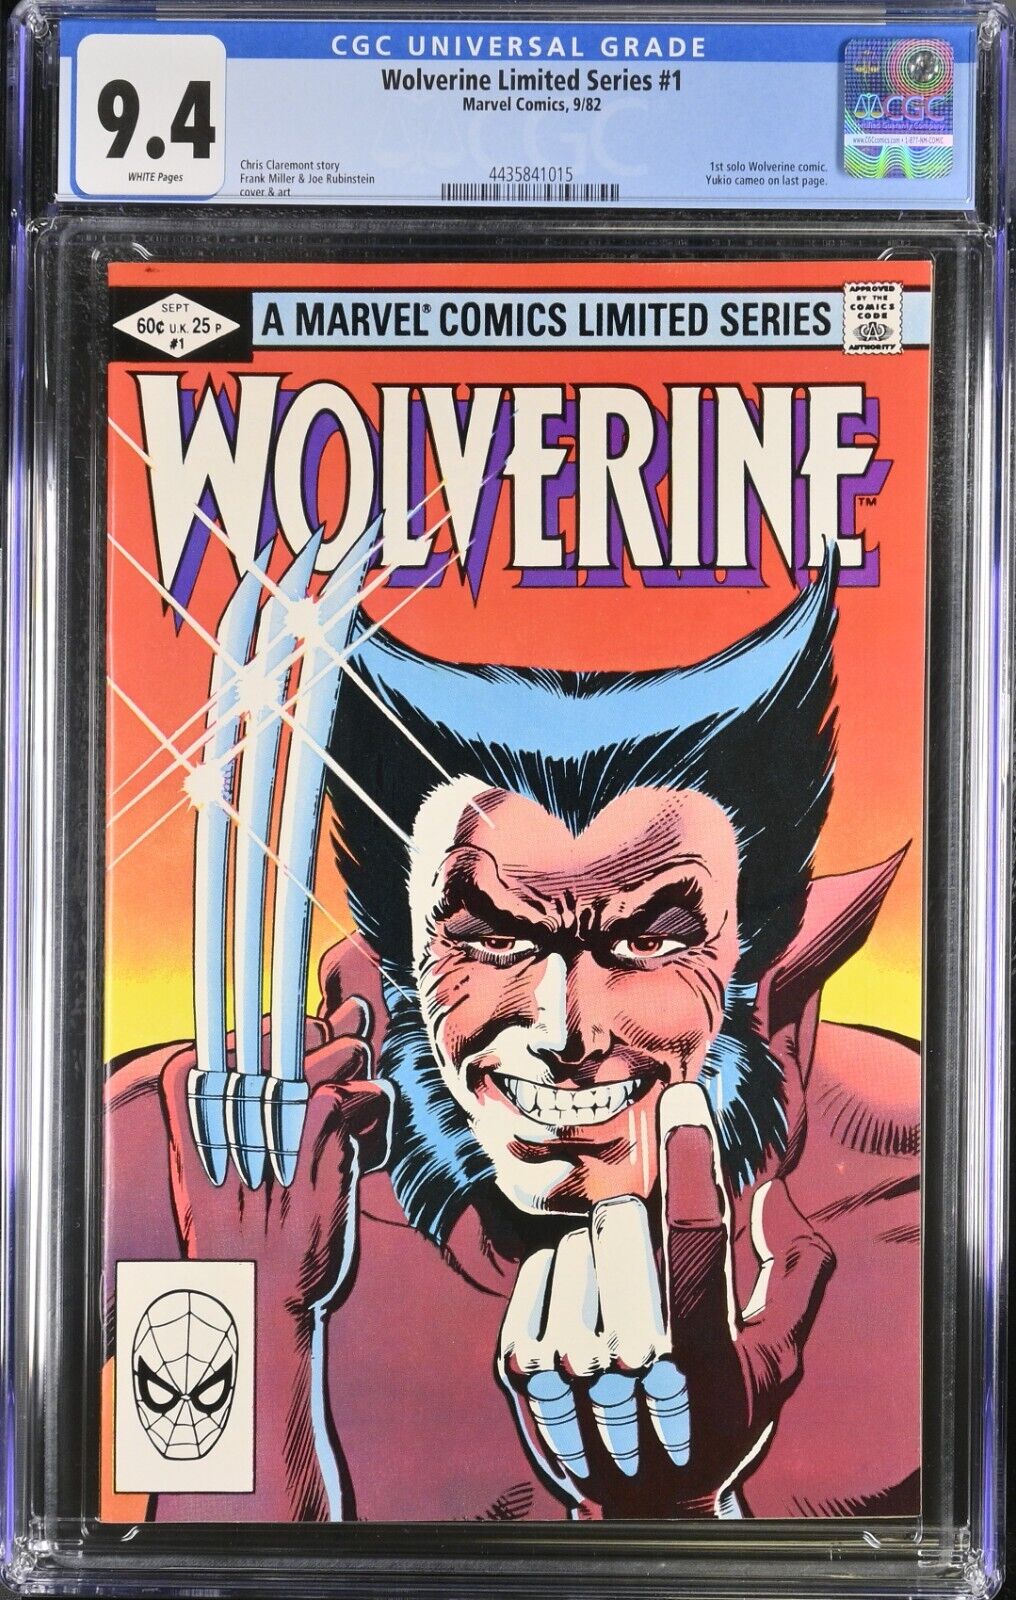 WOLVERINE Limited Series #1 CGC 9.4 NM - F. Miller Marvel 1st Solo Comic 1982